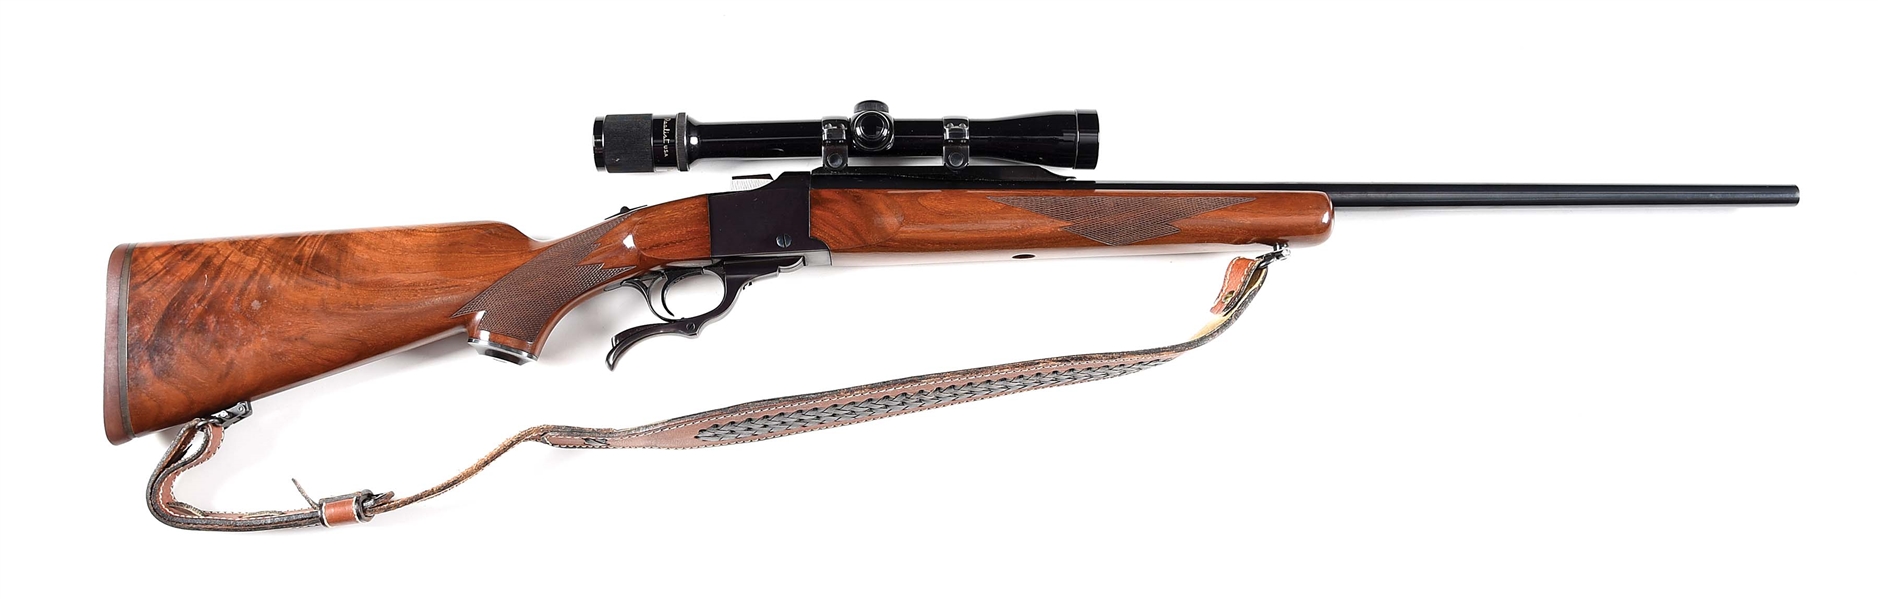 (M) RUGER NO. 1 .270 WINCHESTER SINGLE SHOT RIFLE WITH BOX